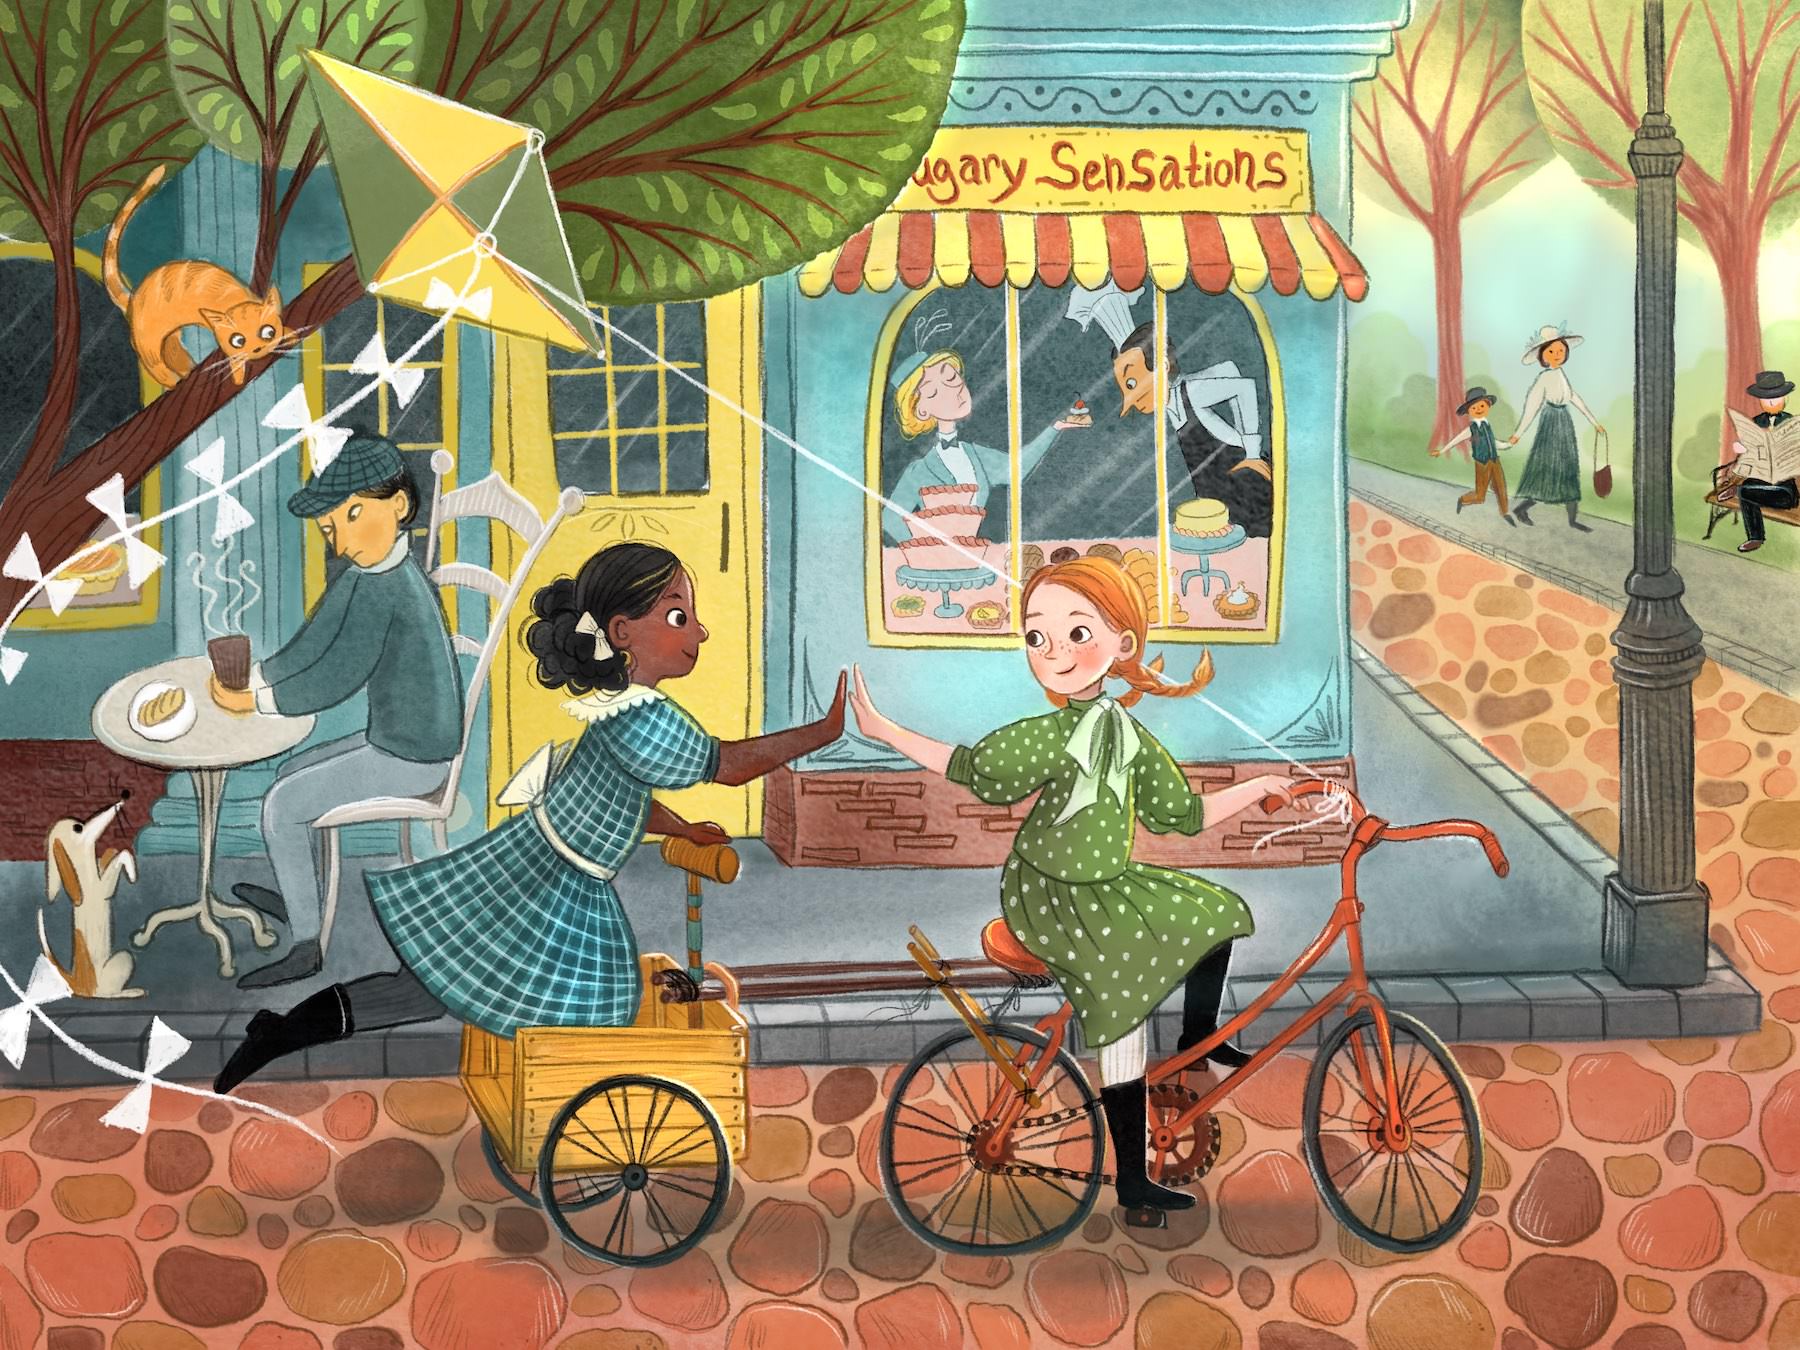 Children's book illustration showing 2 girls riding down a city street on a bike and cart. The cart is home-made from odds and ends found in an old shed, and it attached to the back of the bike. One girl, who is black and wears a blue plaid dress, is standing in the cart, holding the handle, and using her foot to help push her and her friend along. The other girl has red hair and is wearing a green dress with white dots. She is on the bike. The two girls are giving each other a high five as they ride. In the background is a cute bakery with figures visible in the window and a patron sitting at a table outside eating a bun and drinking coffee. There is a park visible down a side street and a woman and child walking along the sidewalk, and a man sitting on a park bench reading a newspaper.